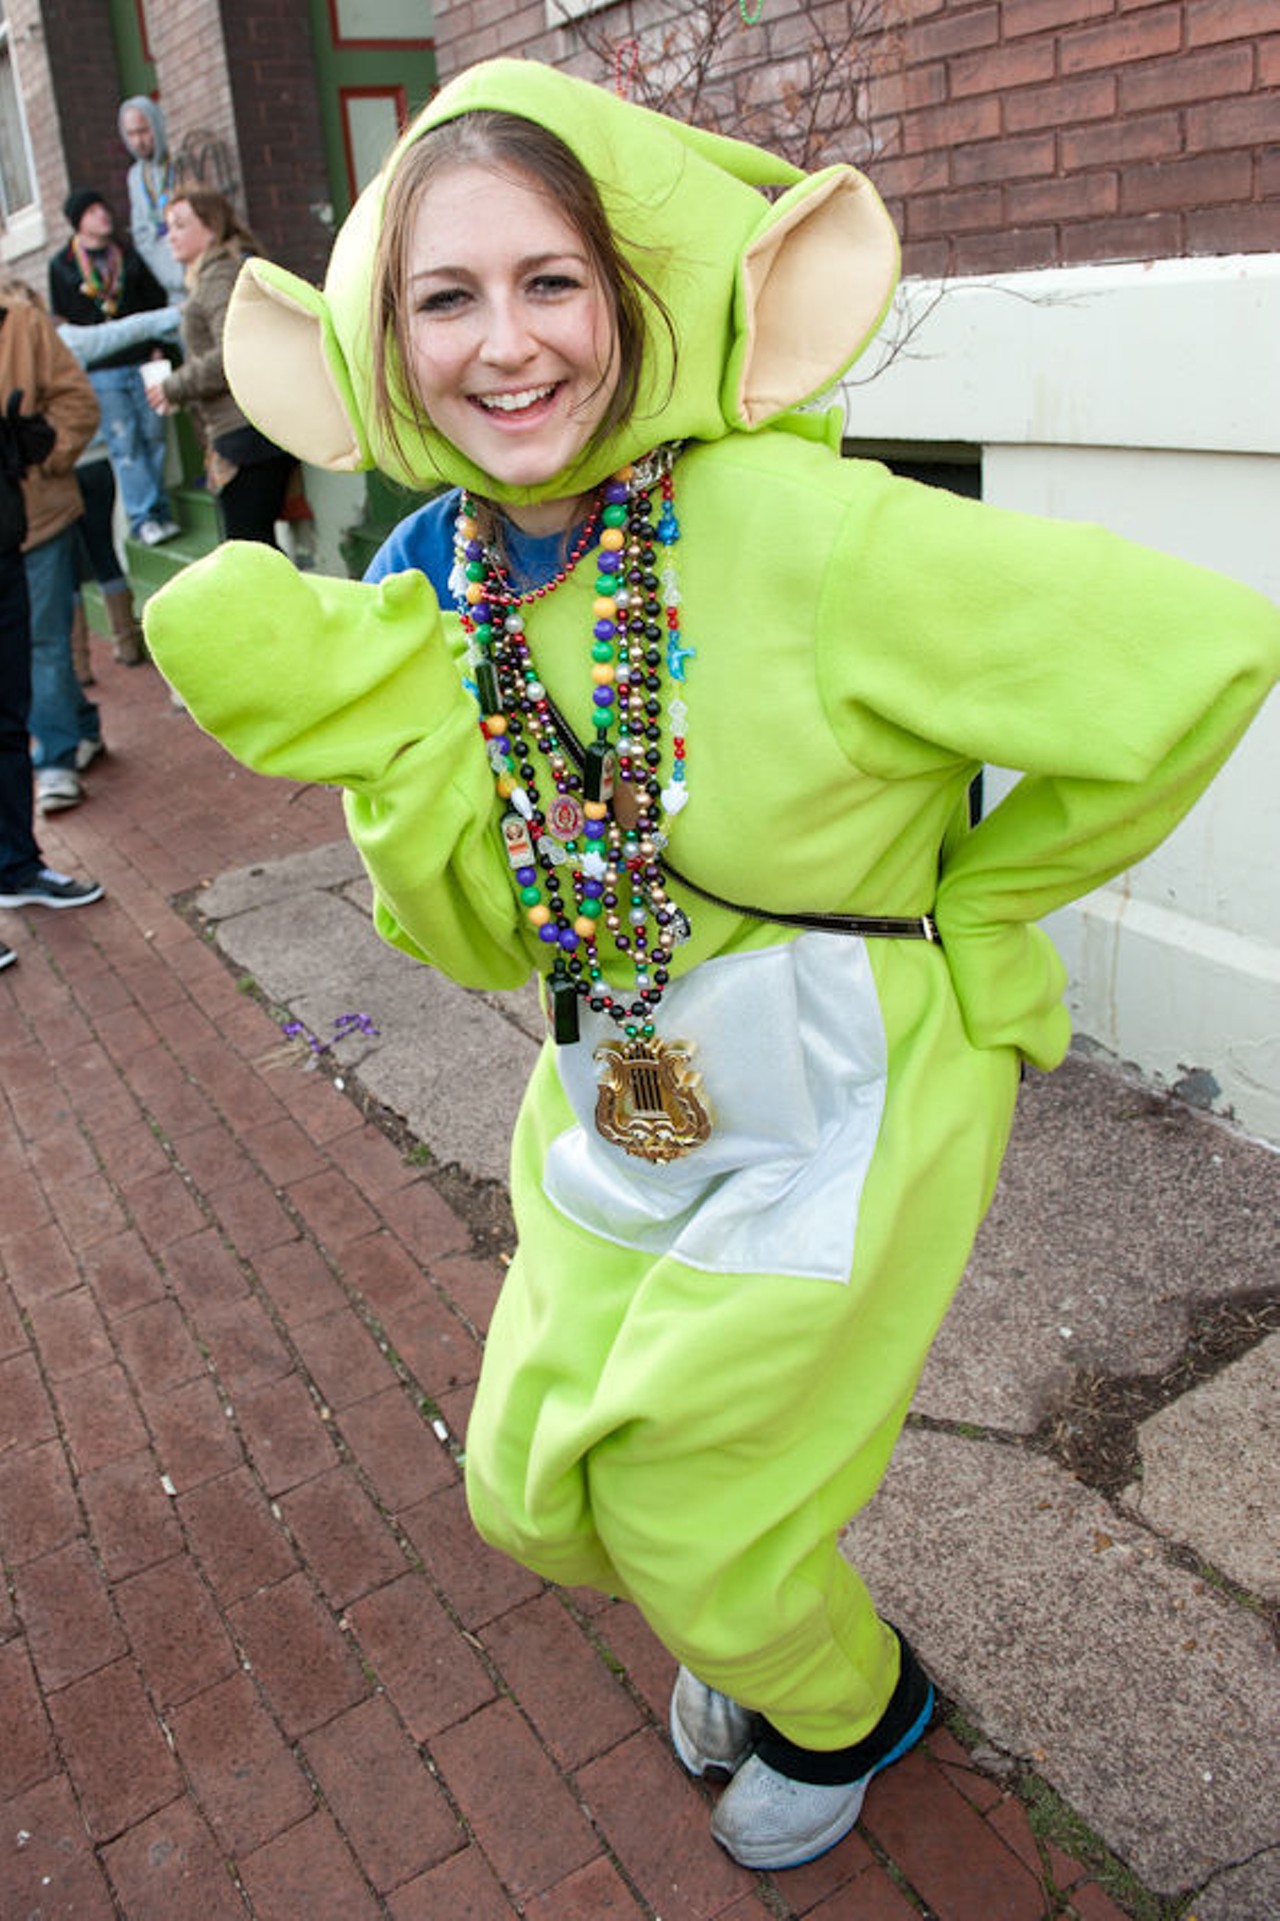 From our Scenes from Soulard Mardi Gras, 2013 (NSFW) slideshow, February, 2013.